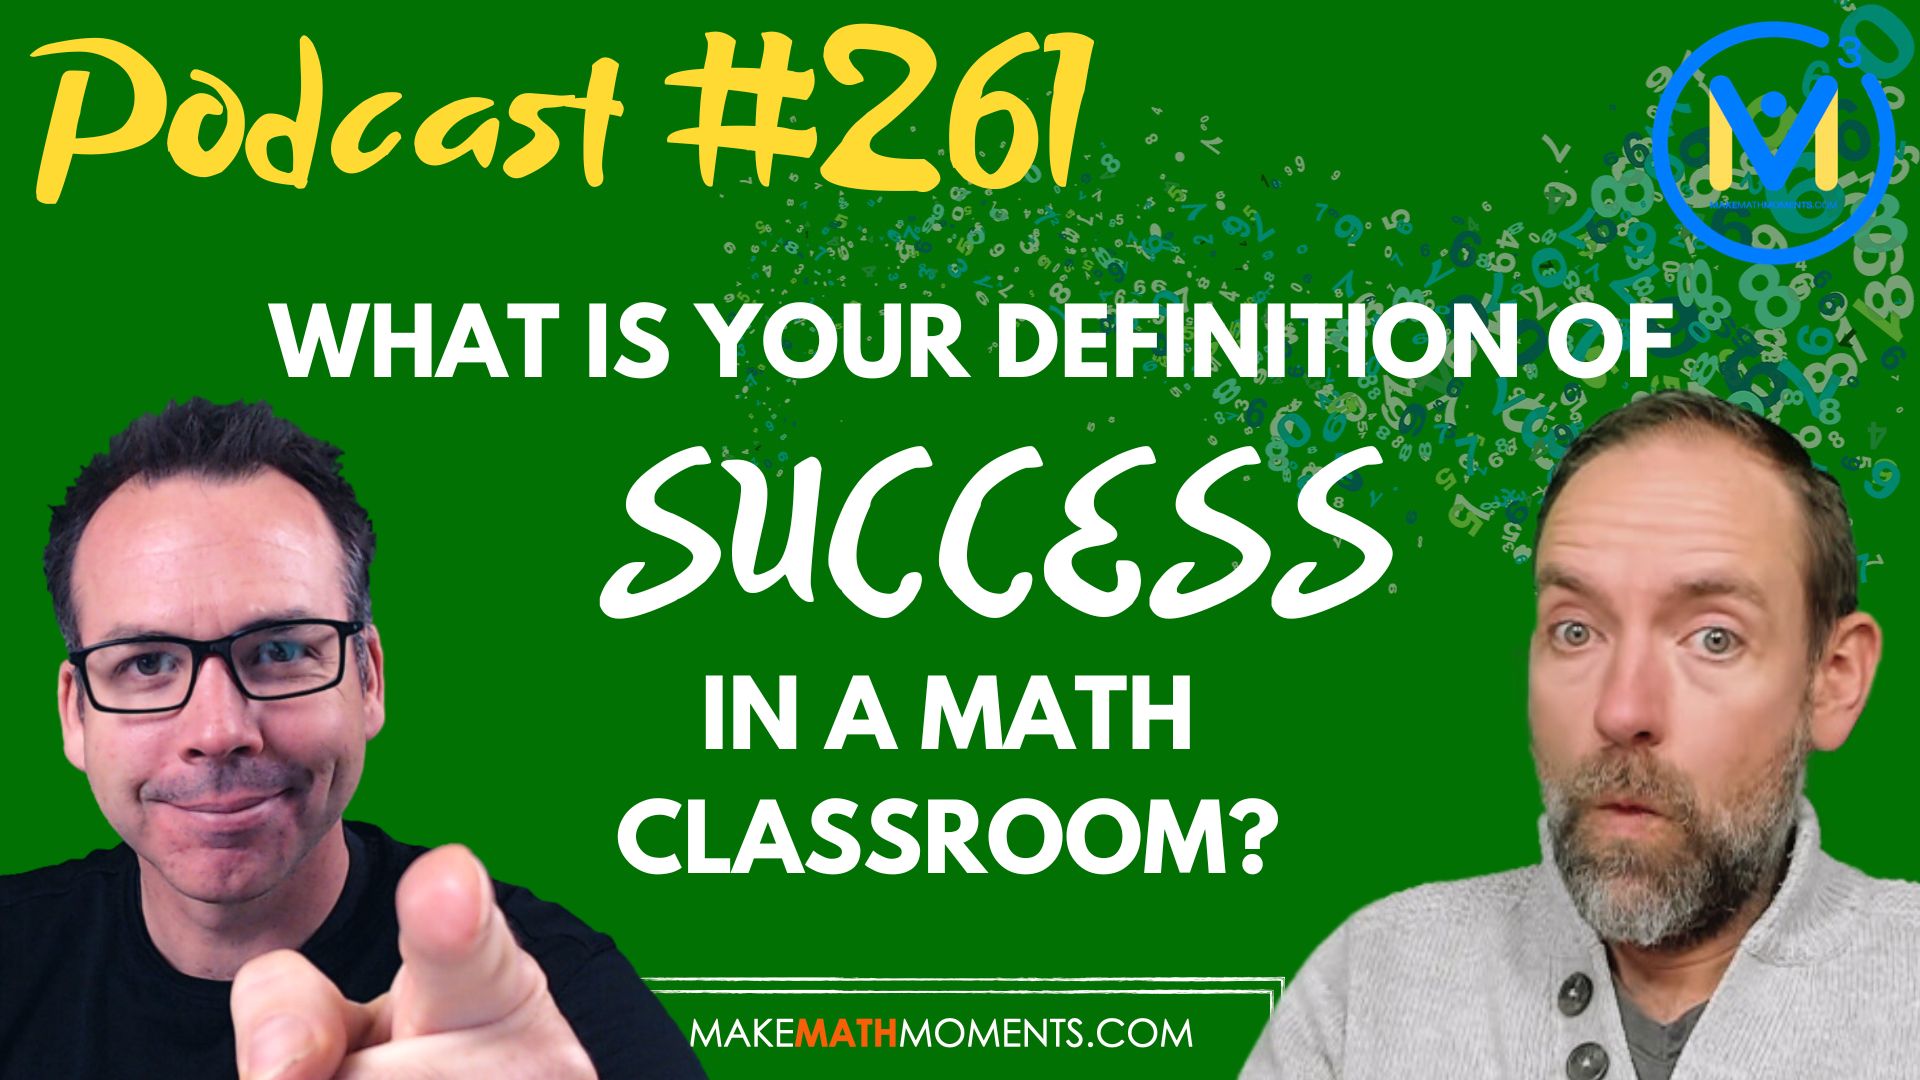 Episode #261: What Is Your Definition of Success In A Math Classroom? – A Math Mentoring Moment